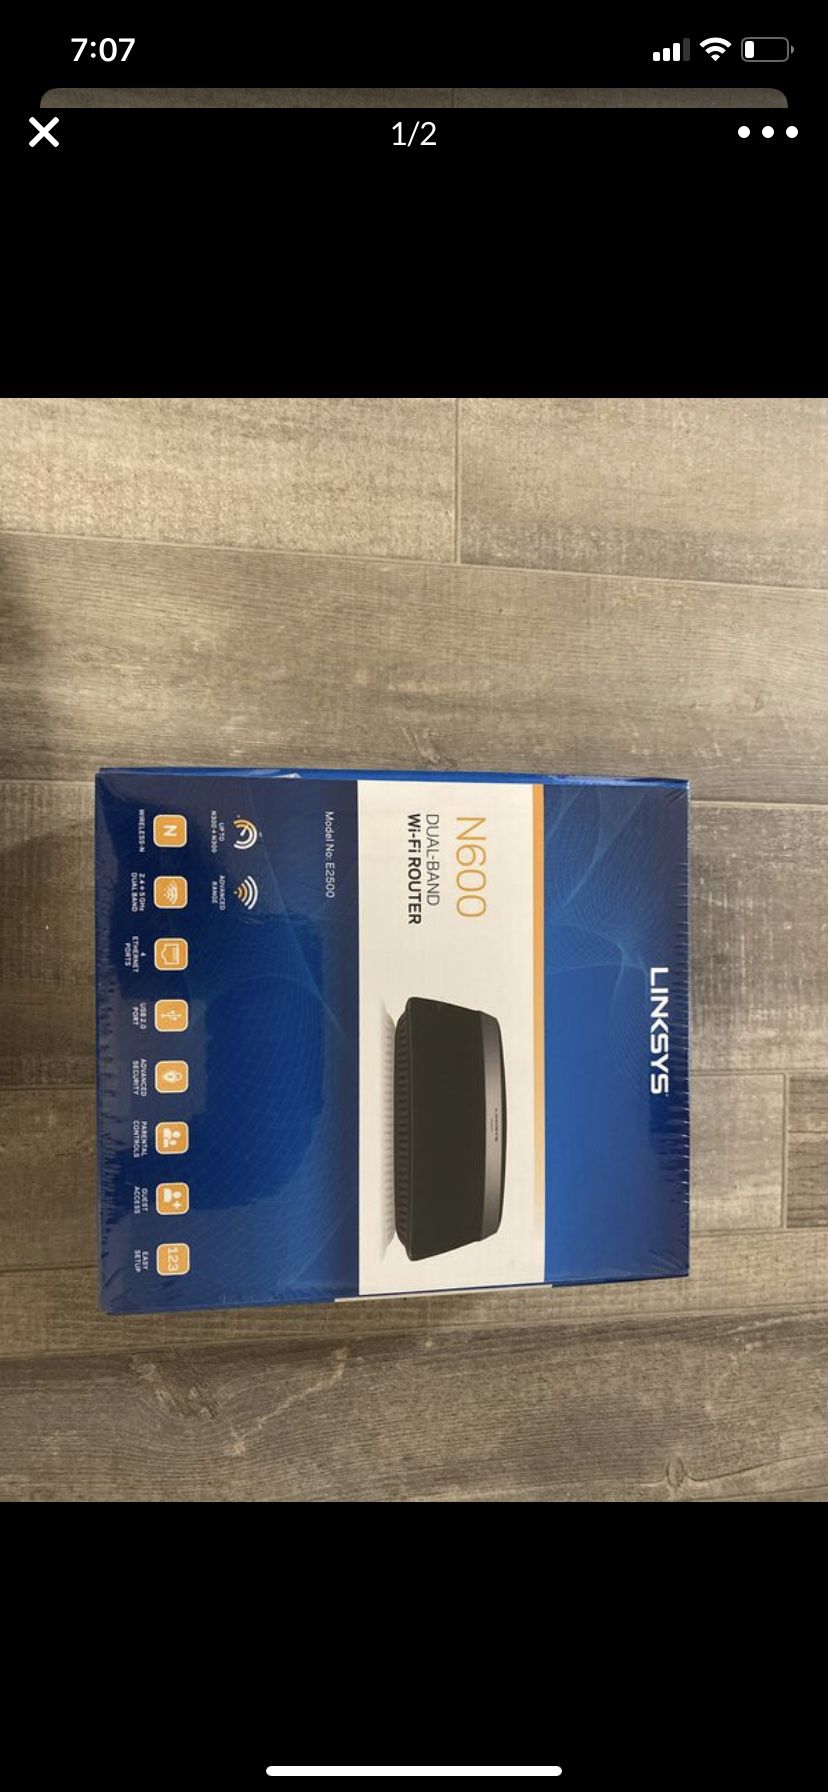 Linksys N600 sealed pack never opened